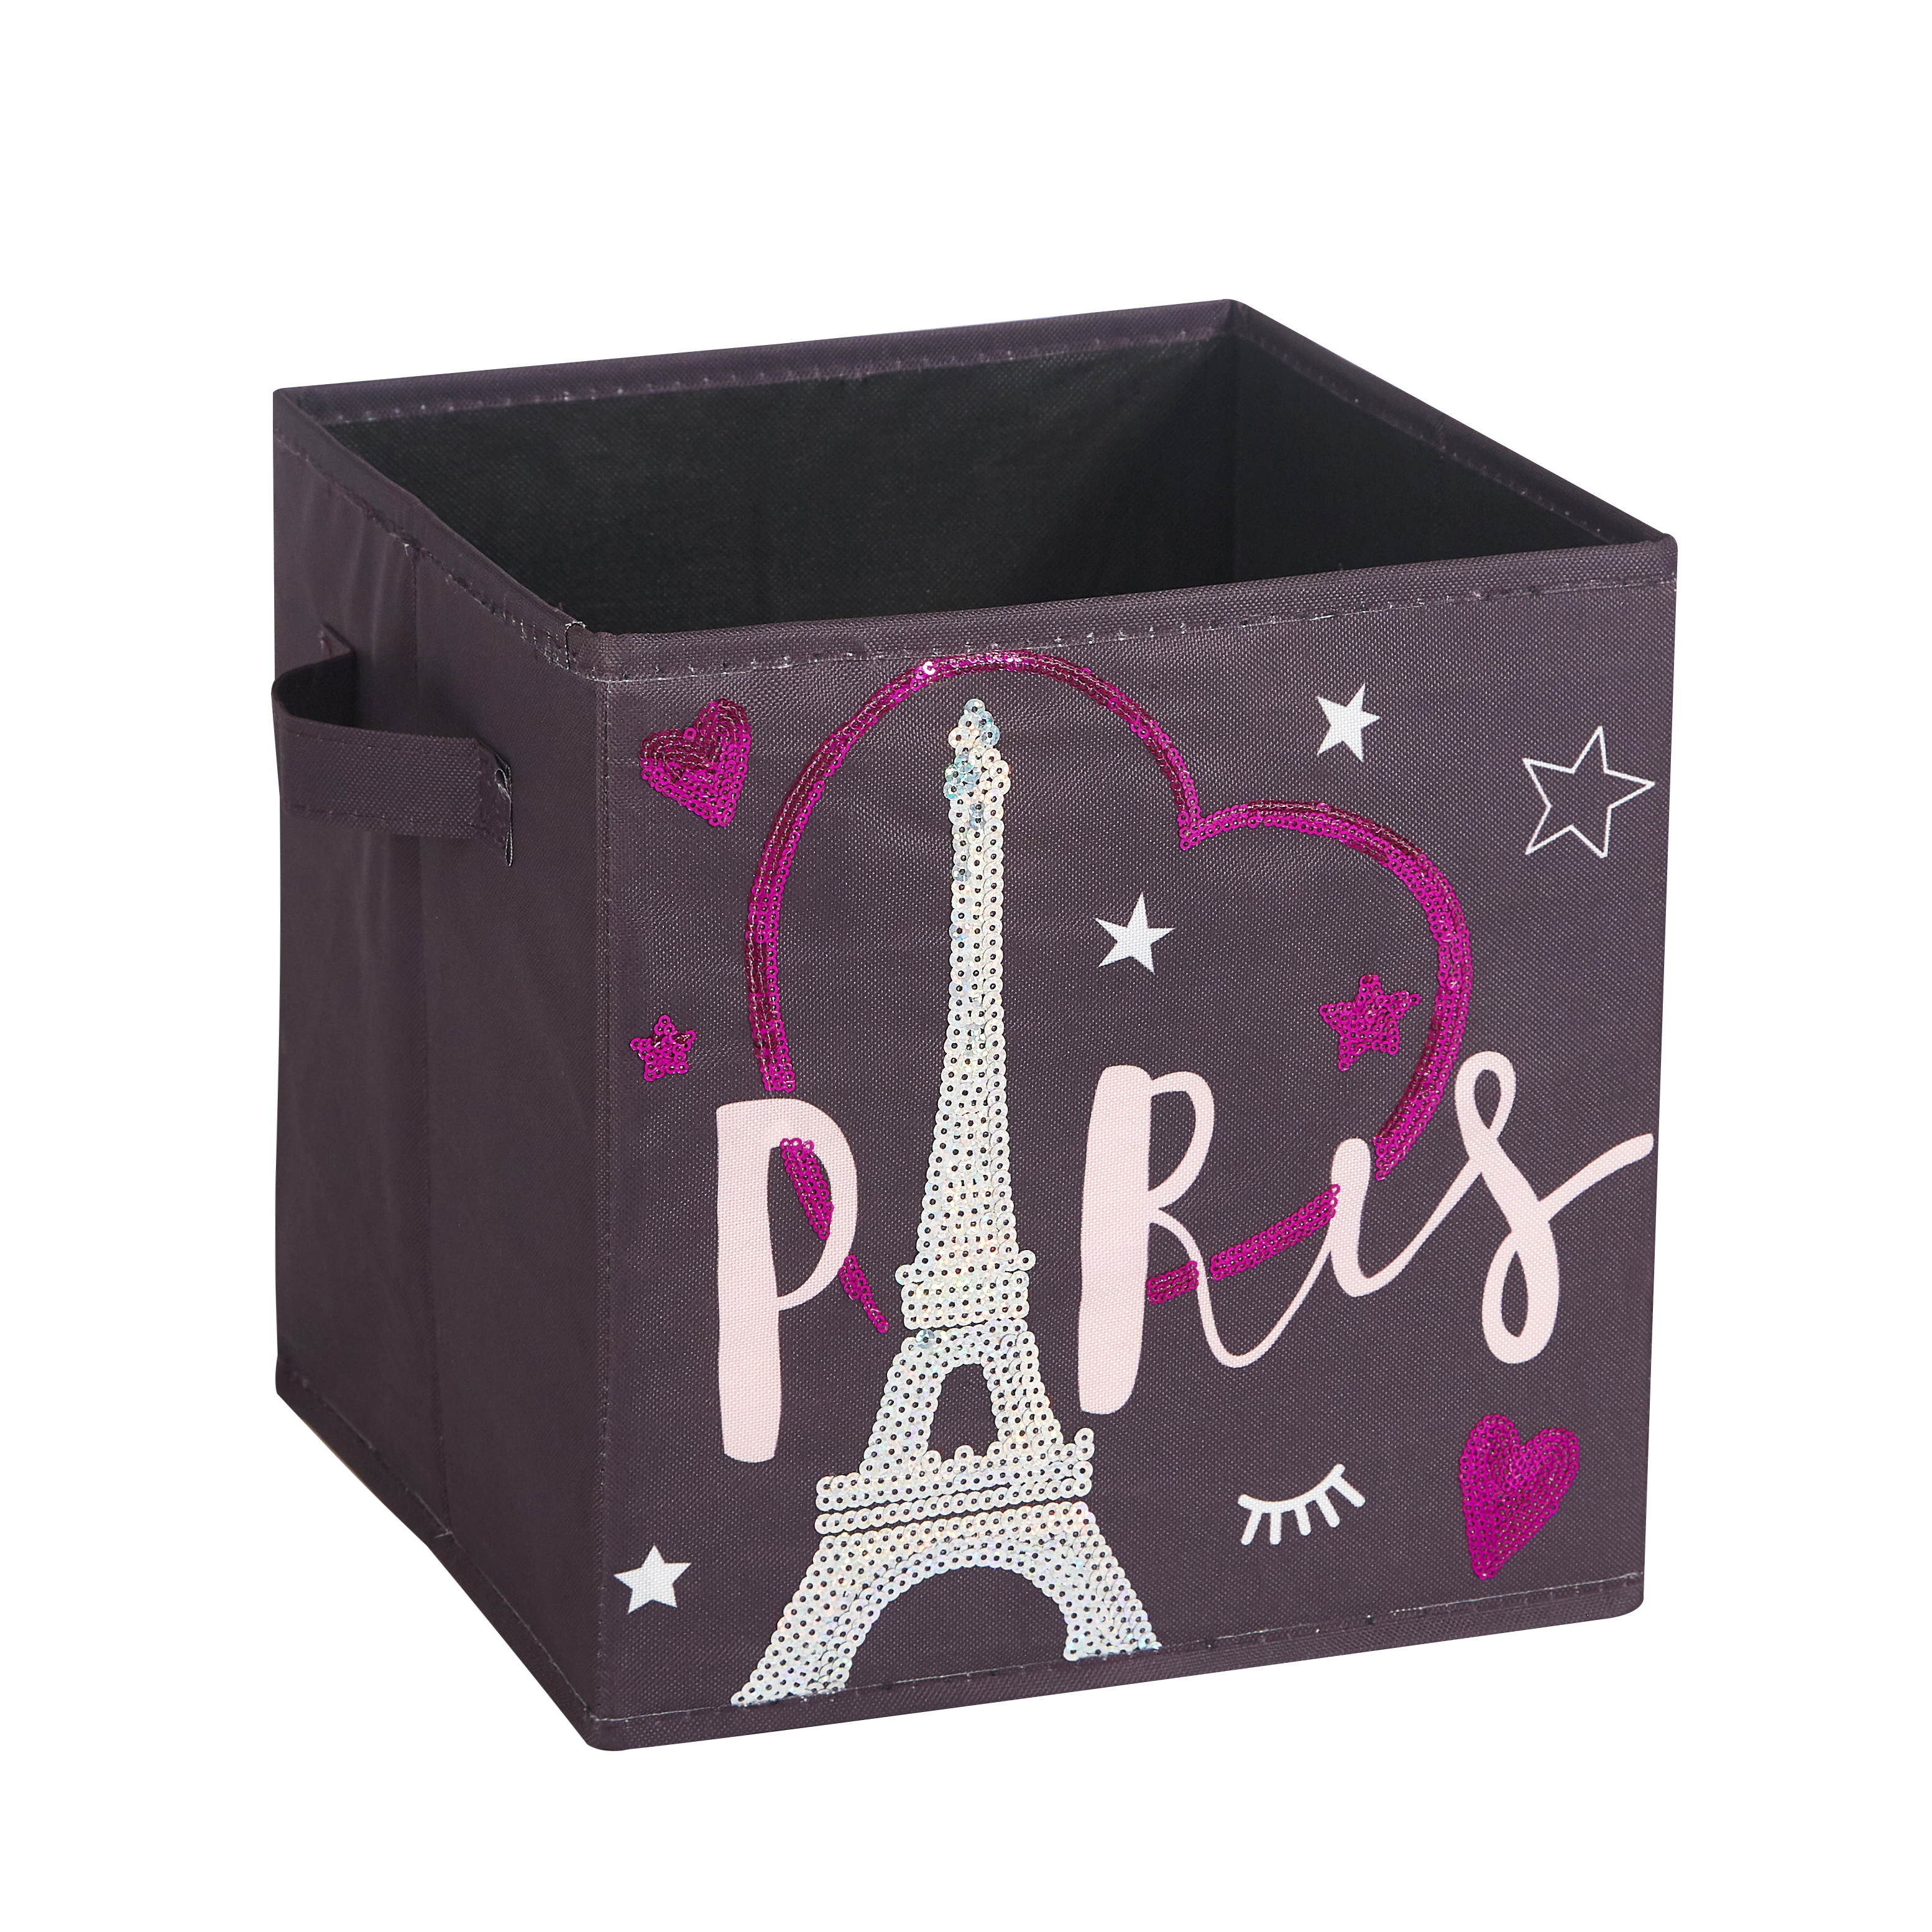 Heritage Club Paris 2 Piece Light Up Polyester Storage Cubes for Kids - image 3 of 7